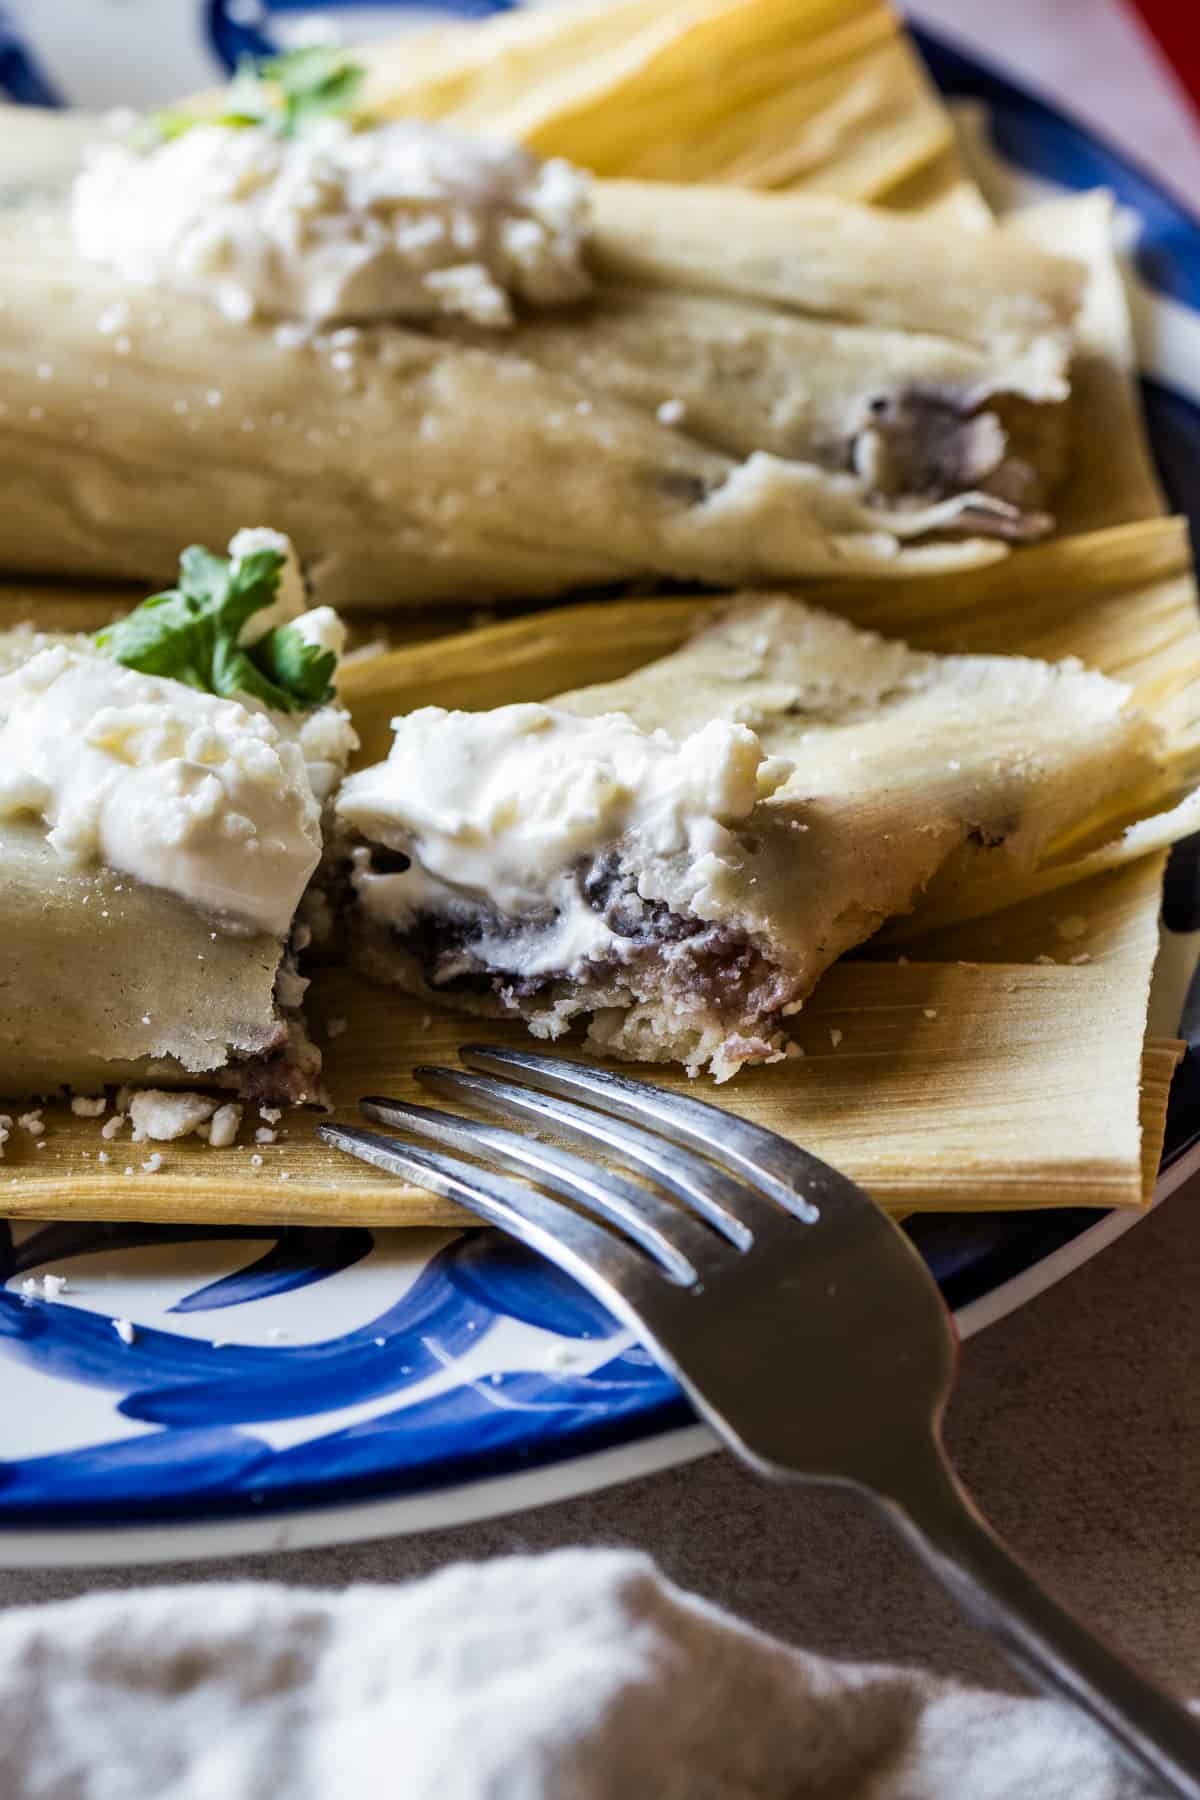 Bean and cheese tamales on a plate cut in half.